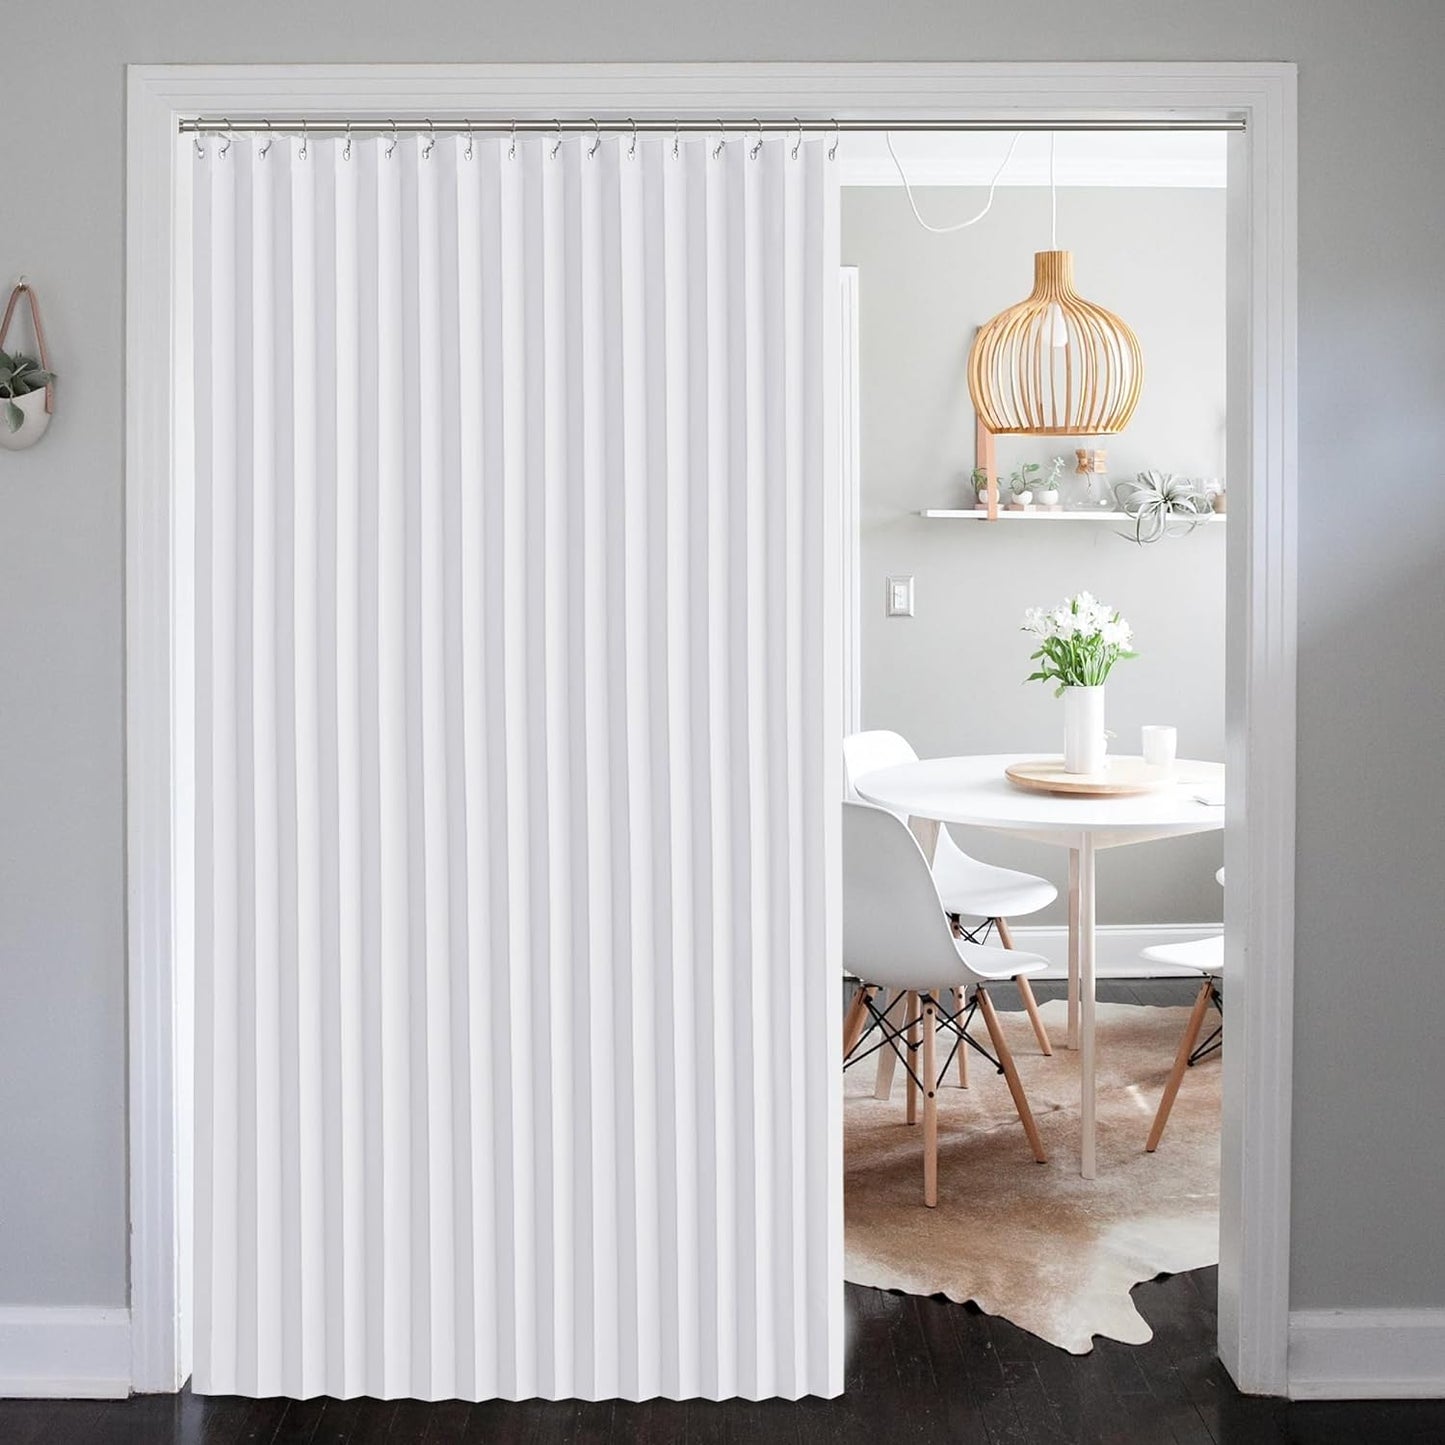 NICETOWN Closet Door Curtains for Bedroom 80 Inch Length, Doorway Curtains for Temporary Door, Blackout Door Window Curtain for Privacy, Room Divider Accordion Doors Interior, 1 Panel, 50" Wide  NICETOWN Pure White W100 X L84 | 1 Panel 